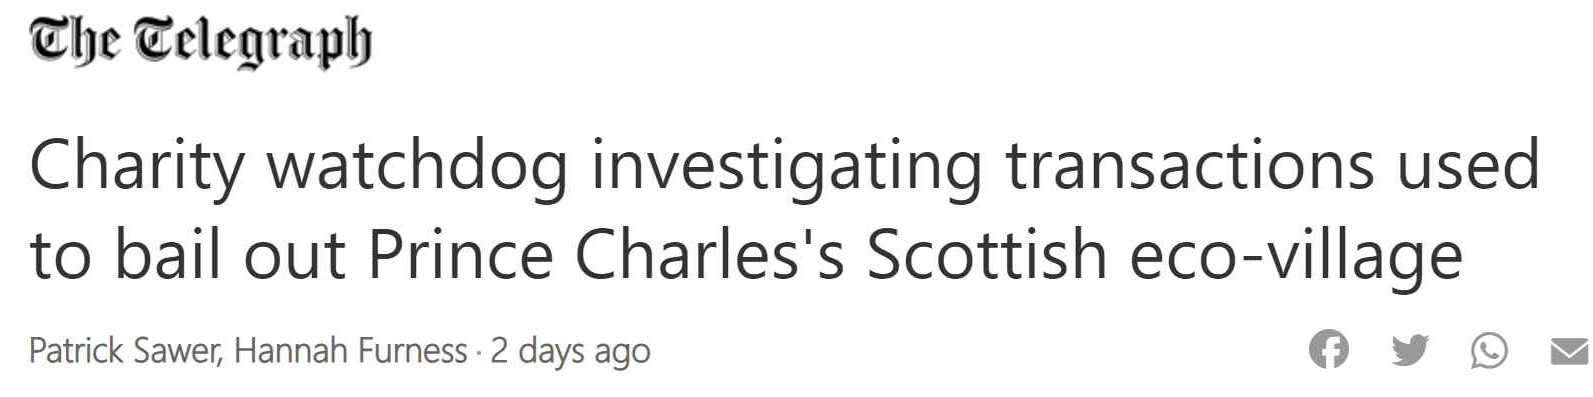 The Telegraph: Charity watchdog investigation transactions used to bail out Prince Charle's Scottish eco village